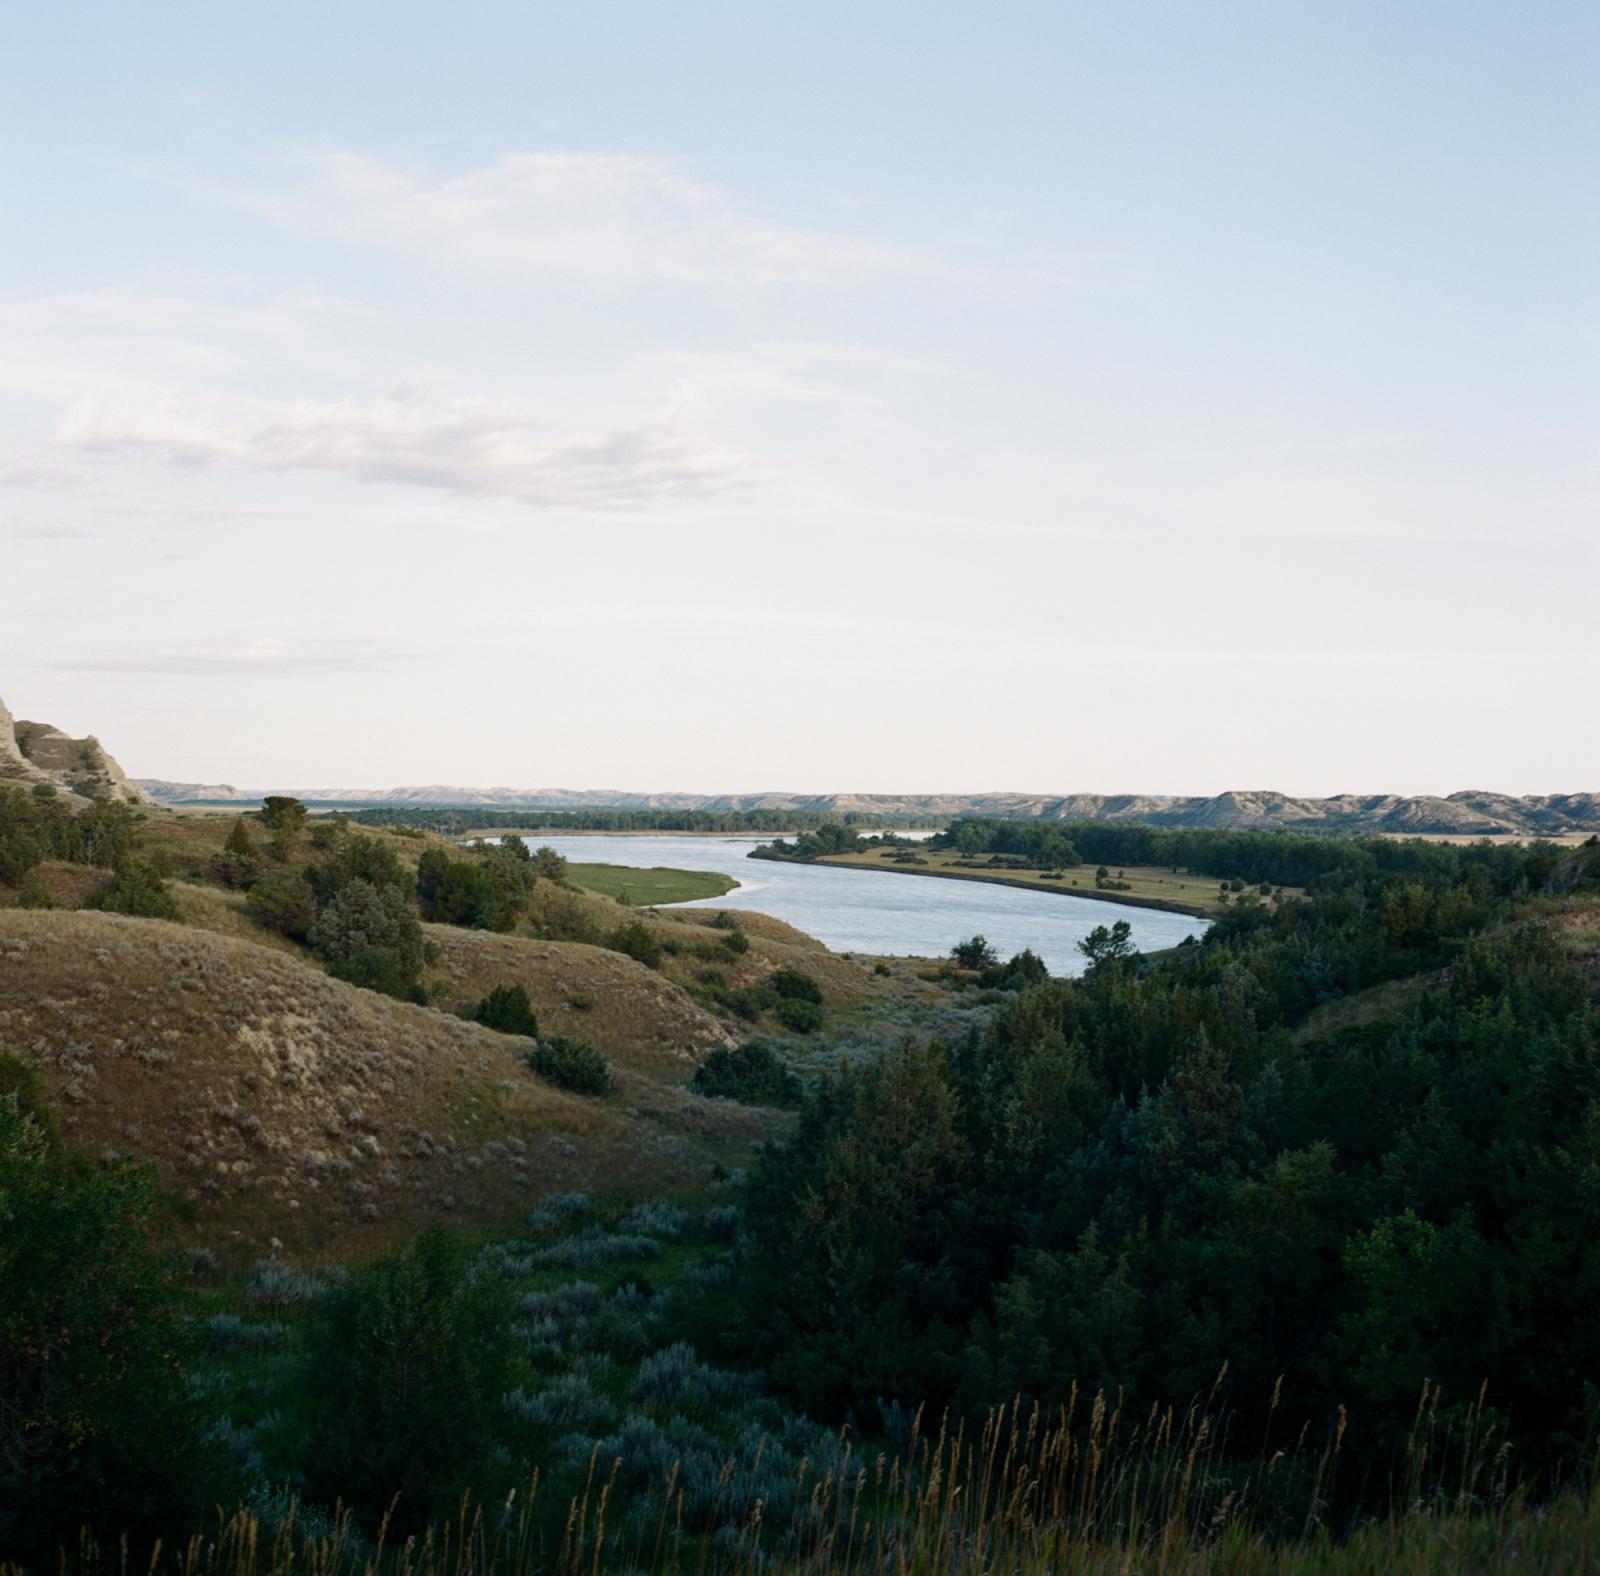 The Bakken oil shale's impact on Native American women - A view of the Missouri River near Fort Peck Indian...